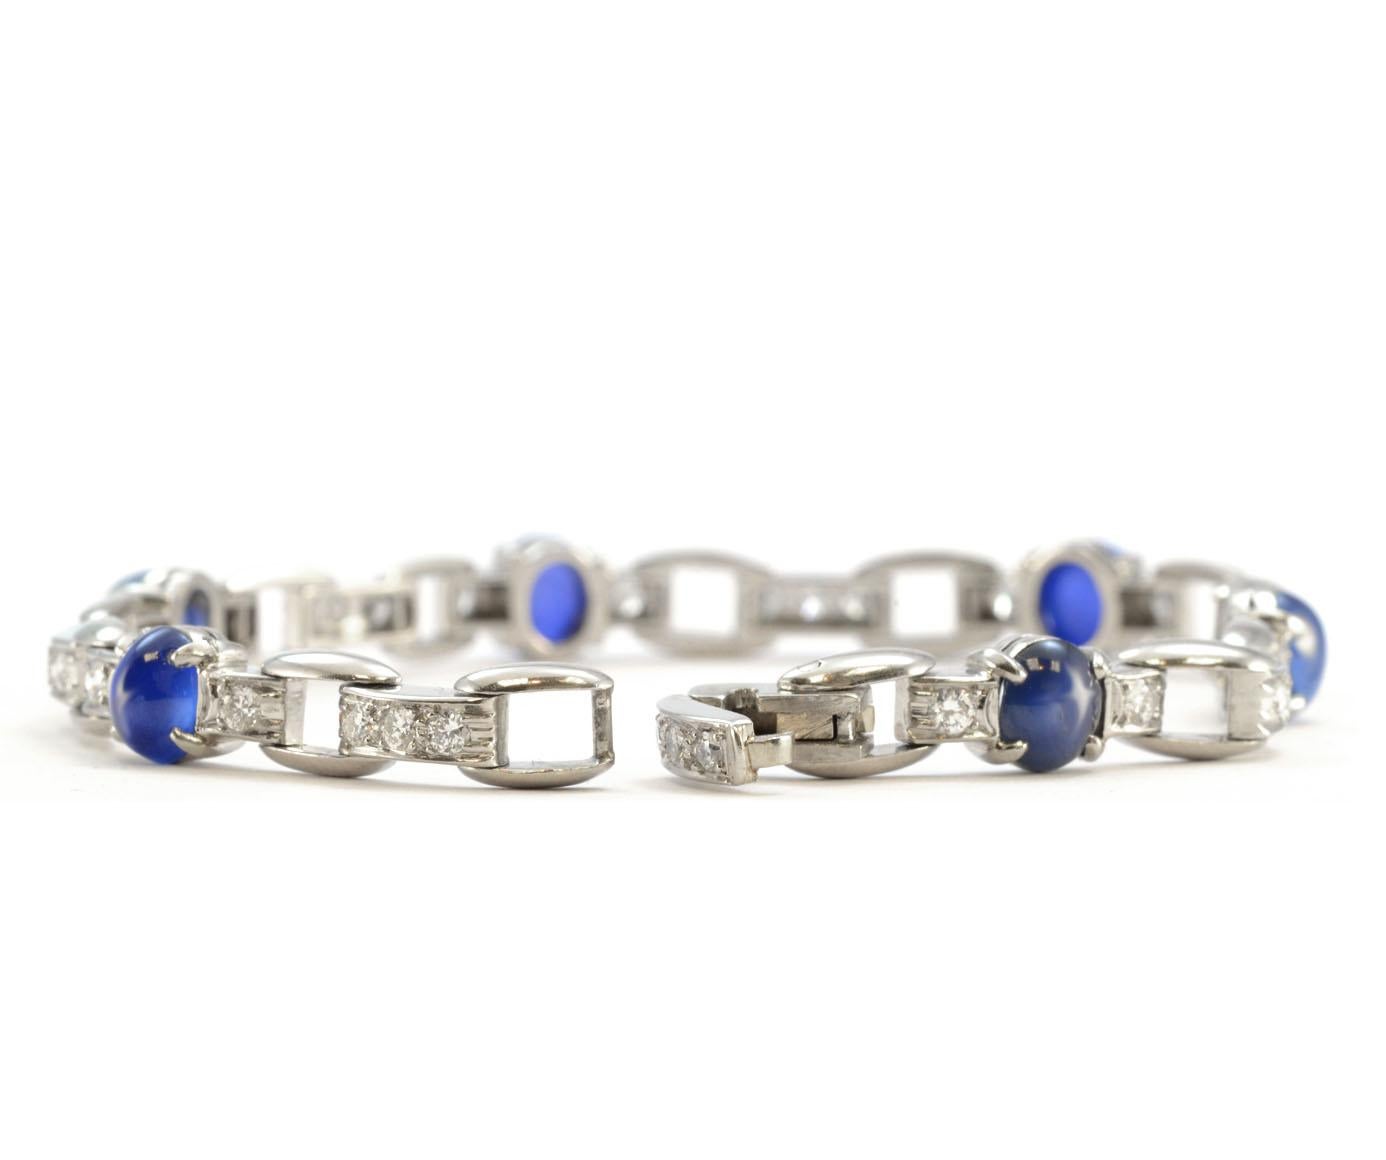 100% Authentic Tiffany & Co. Platinum Genuine Cabochon Sapphire and Diamond Bracelet
Excellent condition! This bracelet is exceptionally beautiful. Crafted in pure platinum, this bracelet features 6 genuine cabochon sapphires, measuring